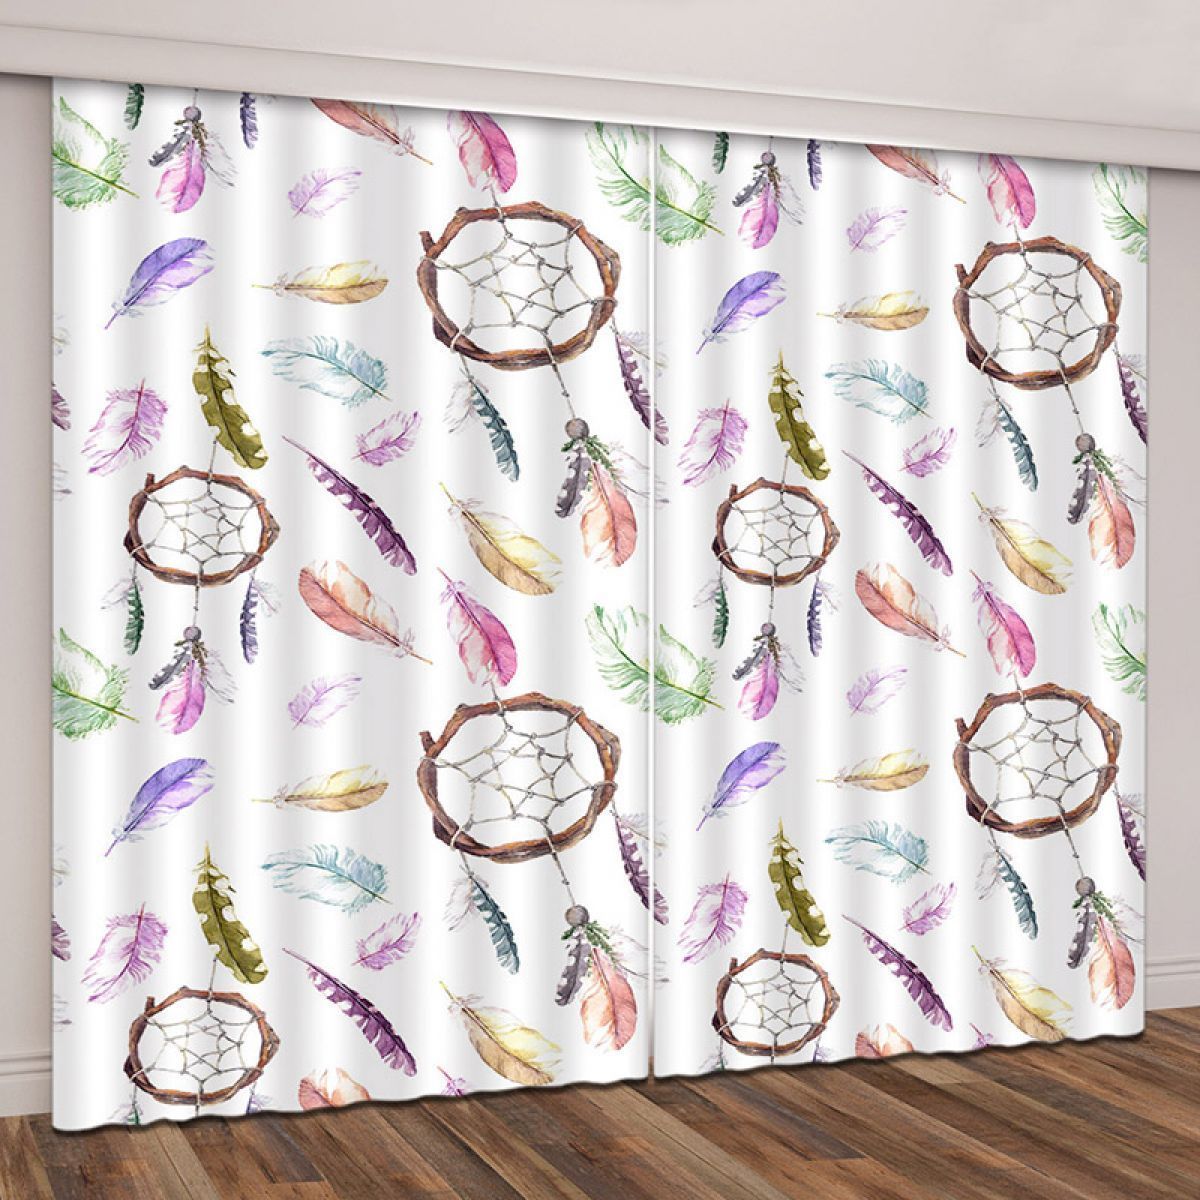 3d Dreamcatcher With Feather Pattern Printed Window Curtain Home Decor